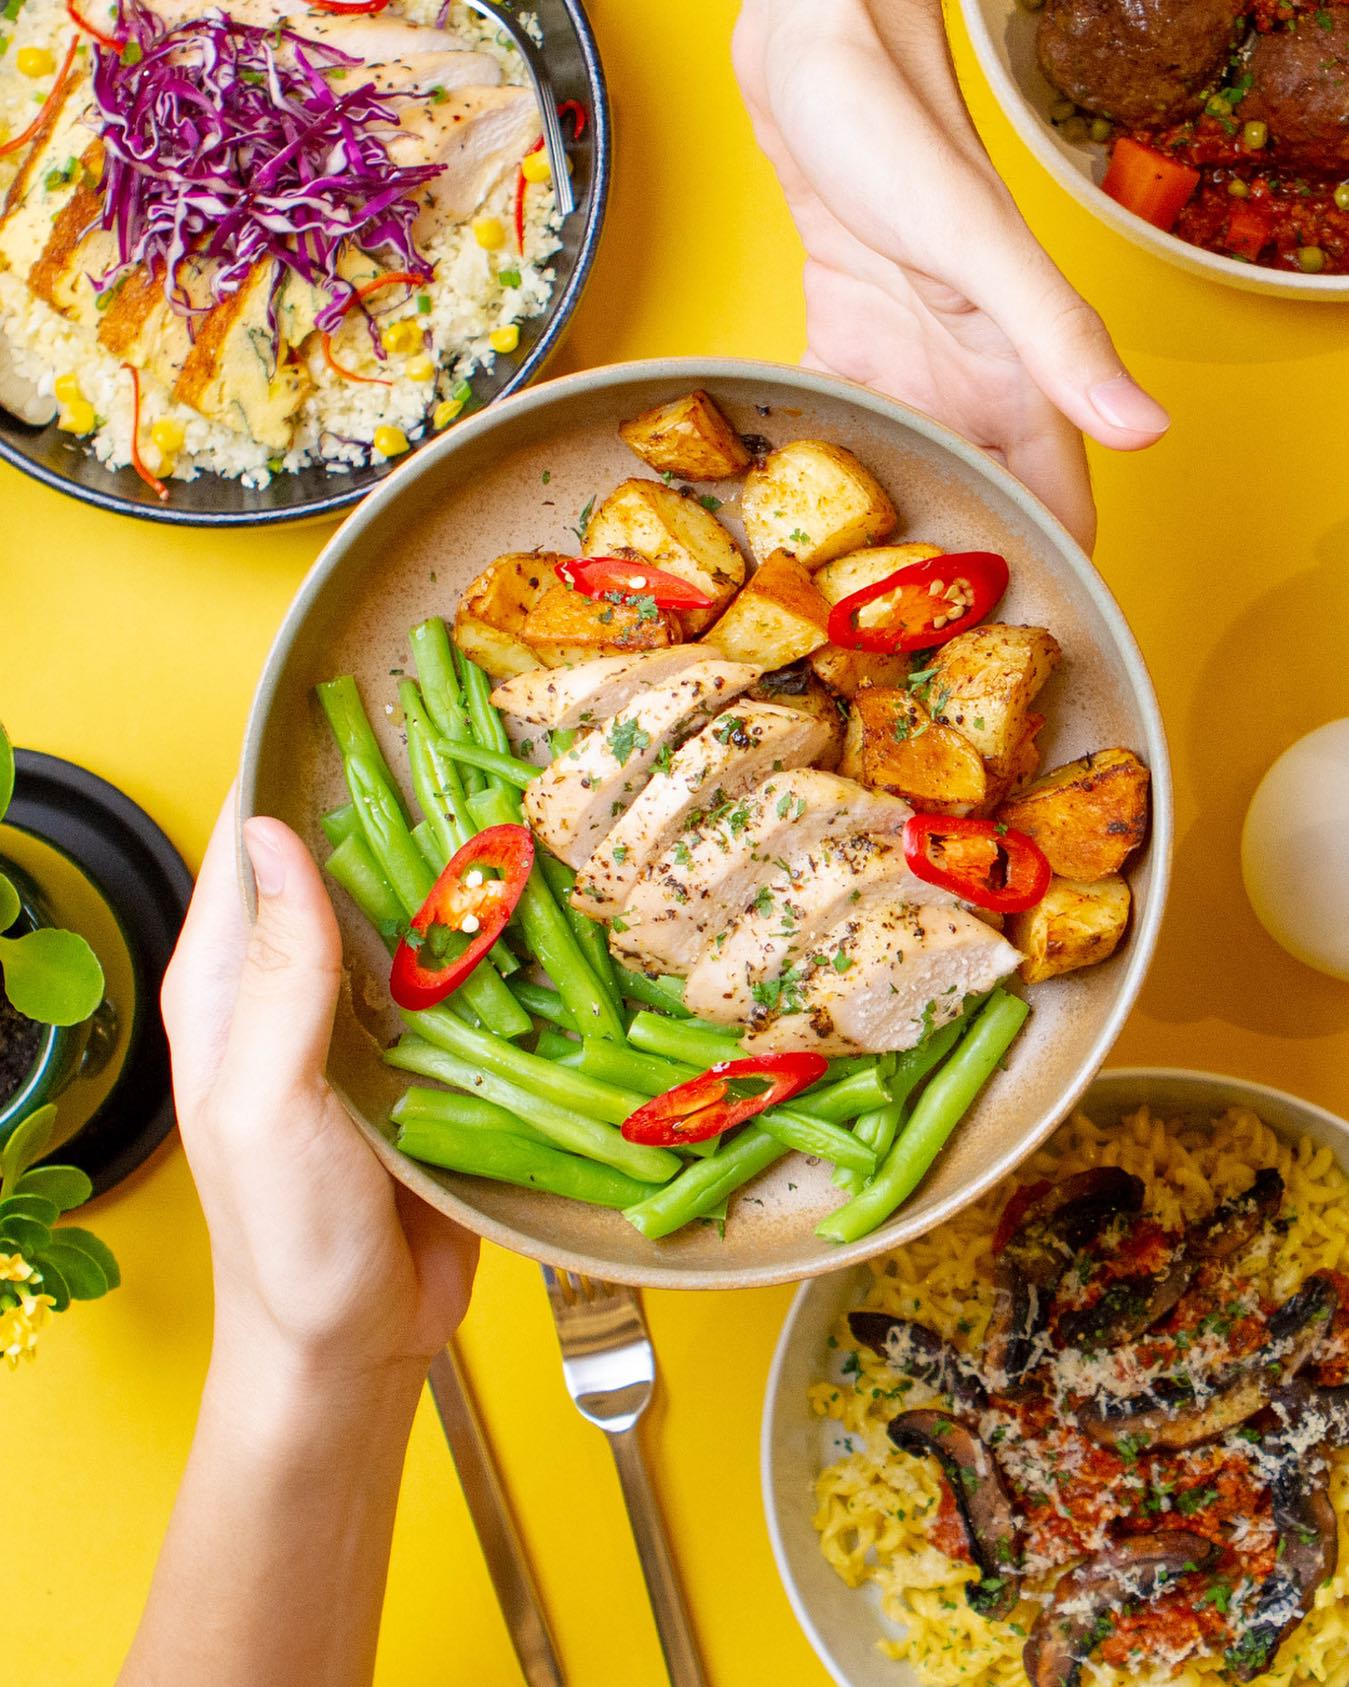 , 6 best meal plans and delivery services for healthy, nutrient-dense meals